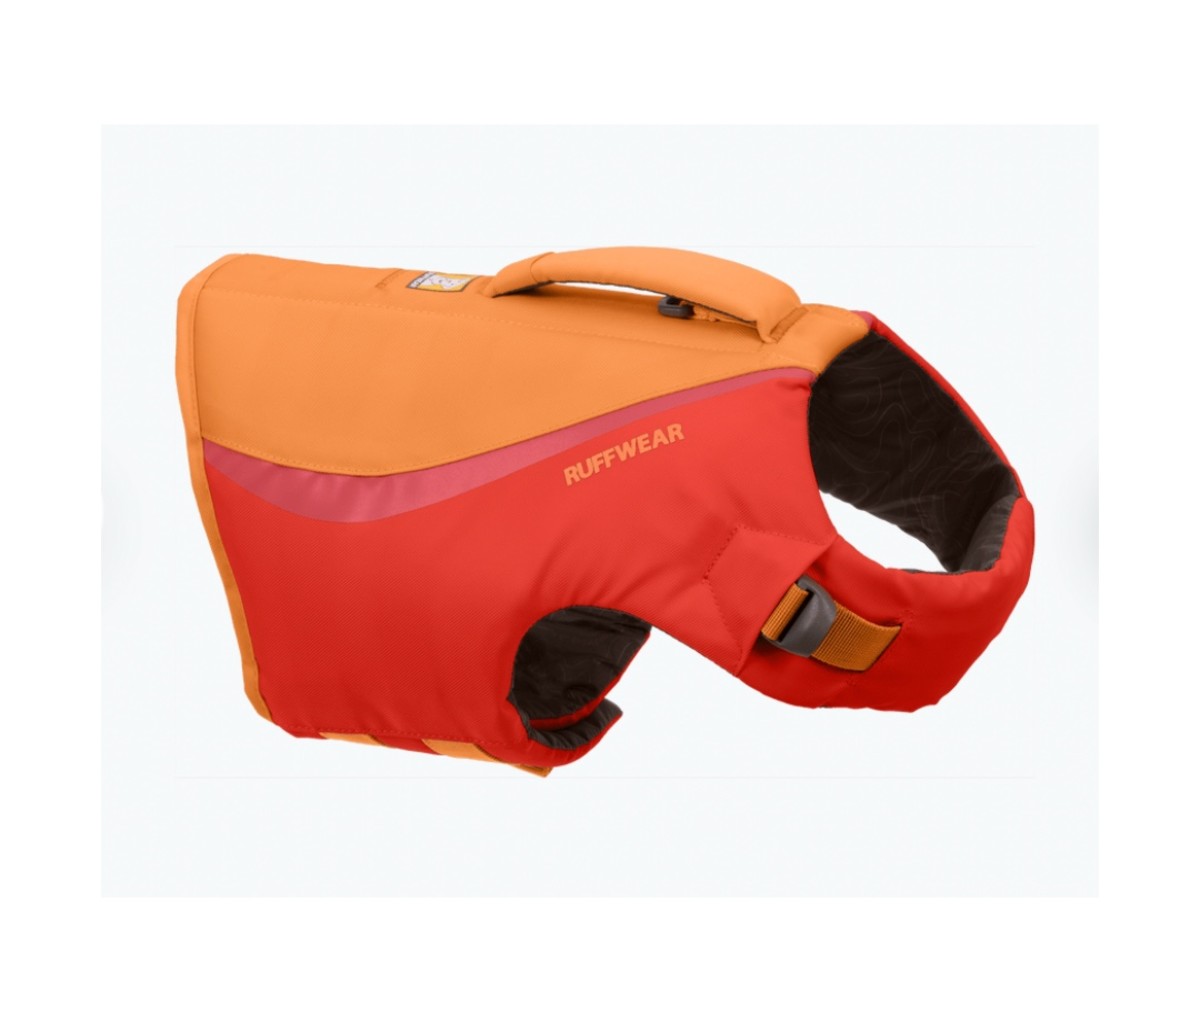 The Ruffwear Float Coat will keep your dog swimming high and having fun in the water.